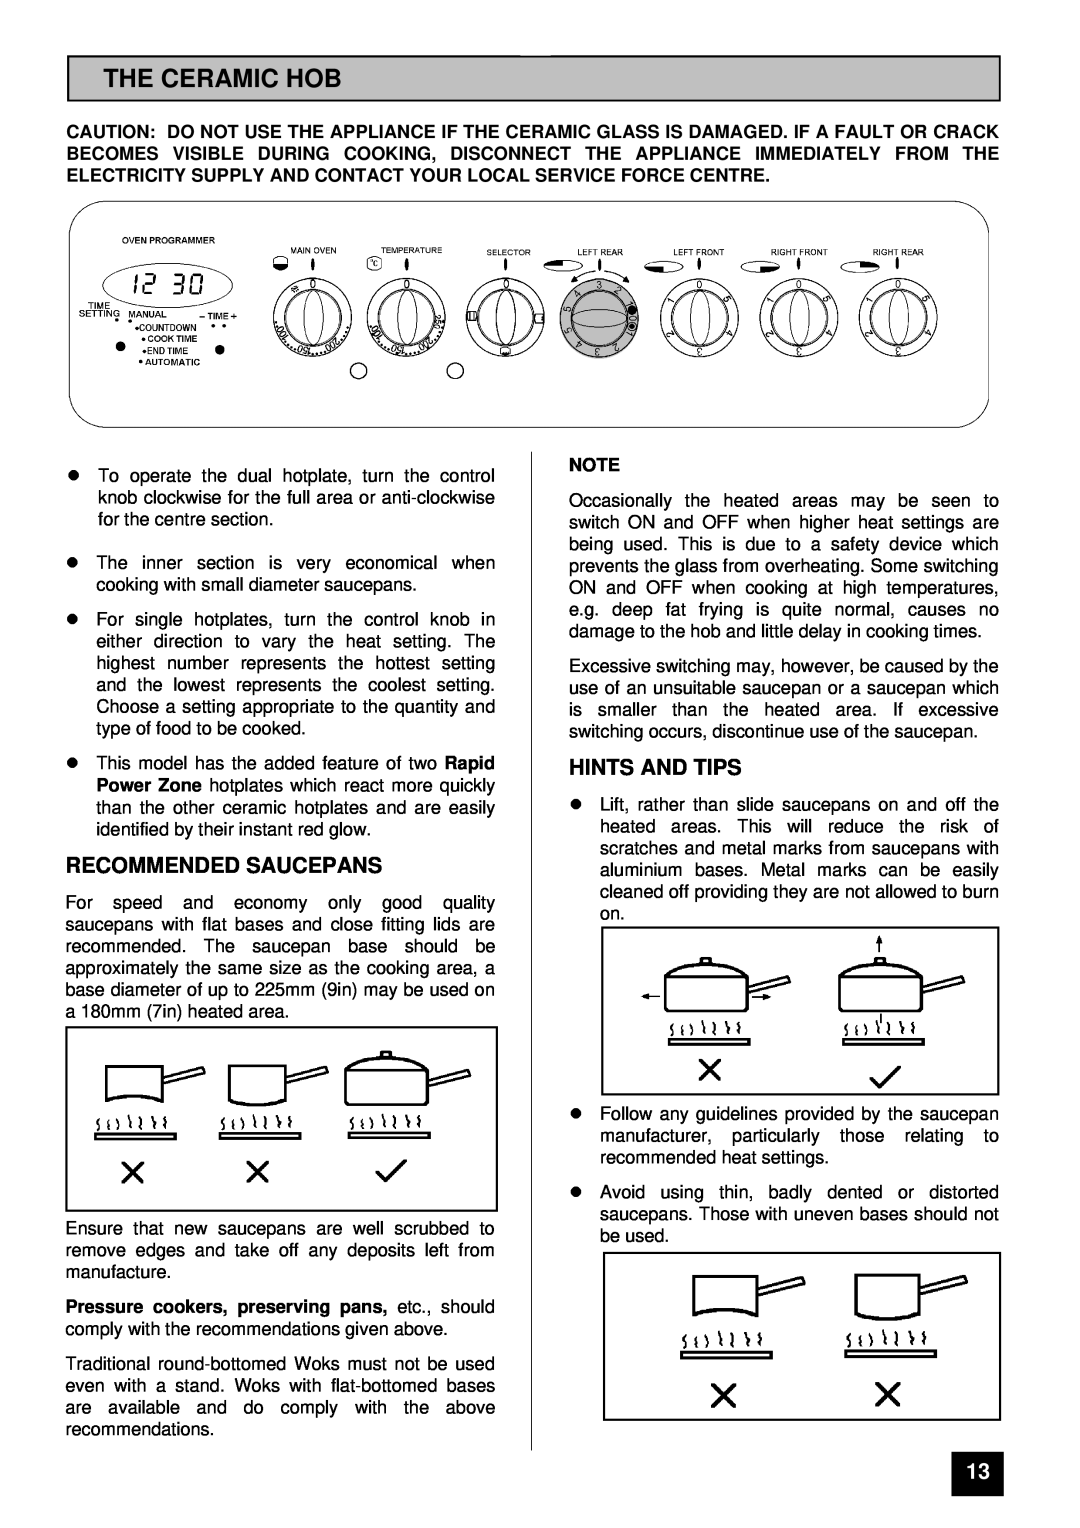 Tricity Bendix SIE 459 installation instructions The Ceramic Hob, Recommended Saucepans, Hints And Tips 